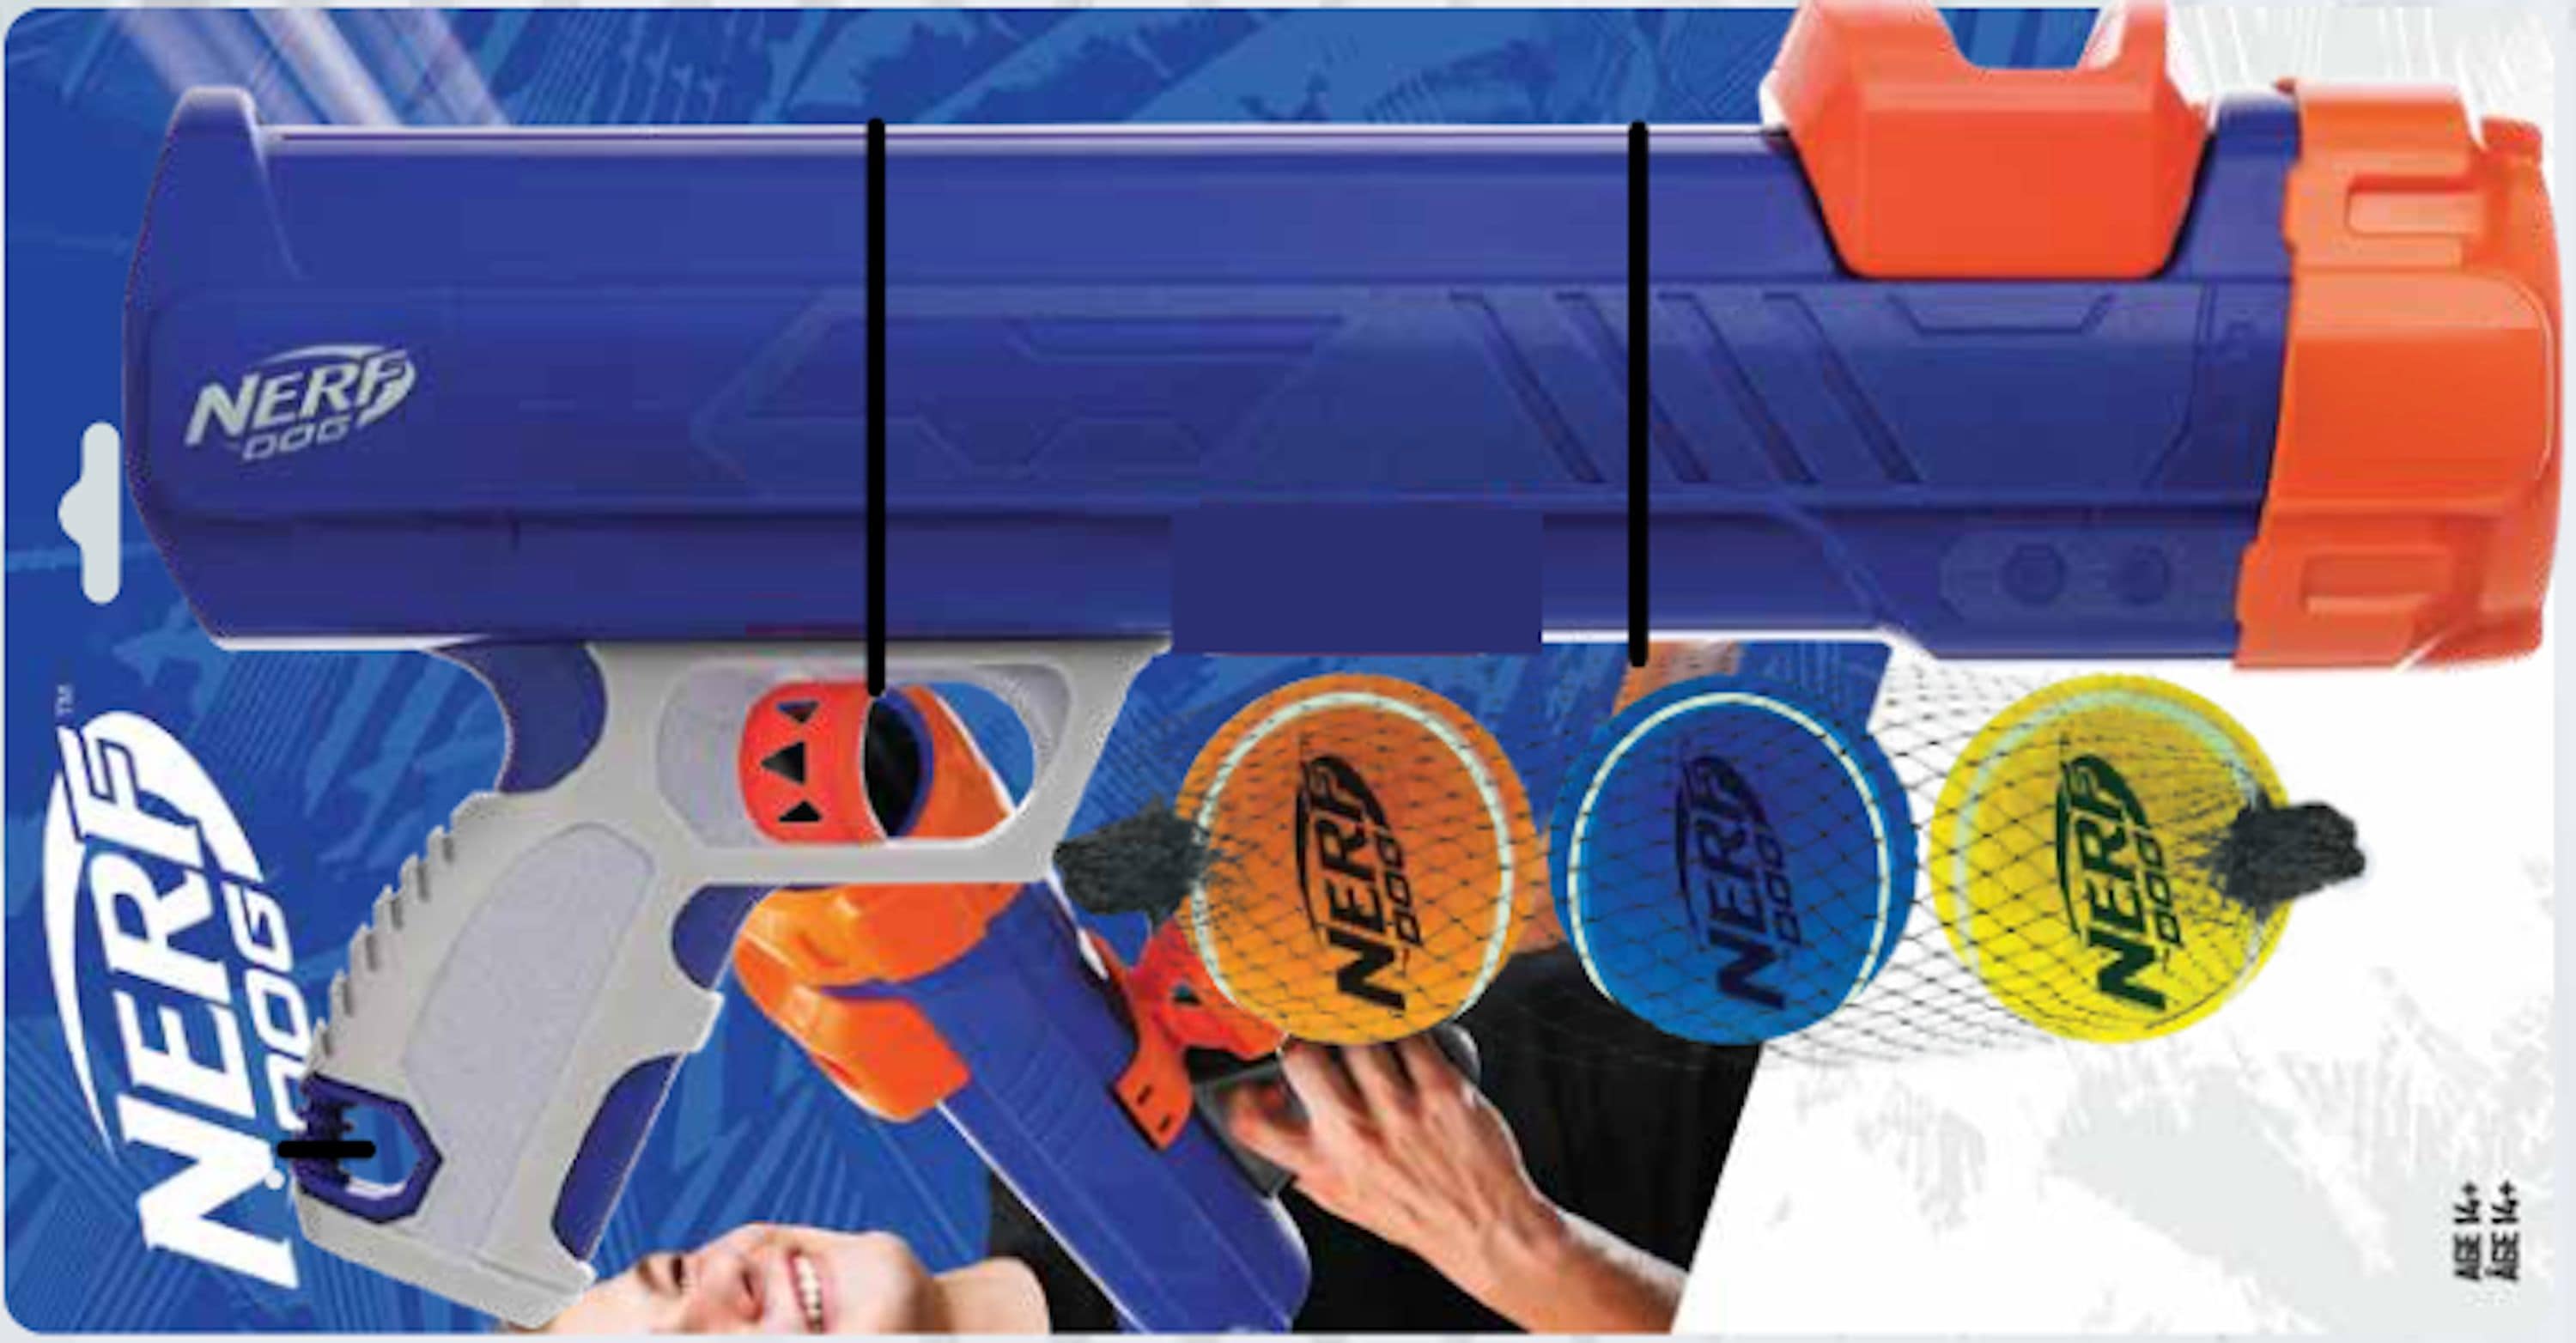 Nerf Shrunk Its Balls for a New Line of More Powerful Blasters